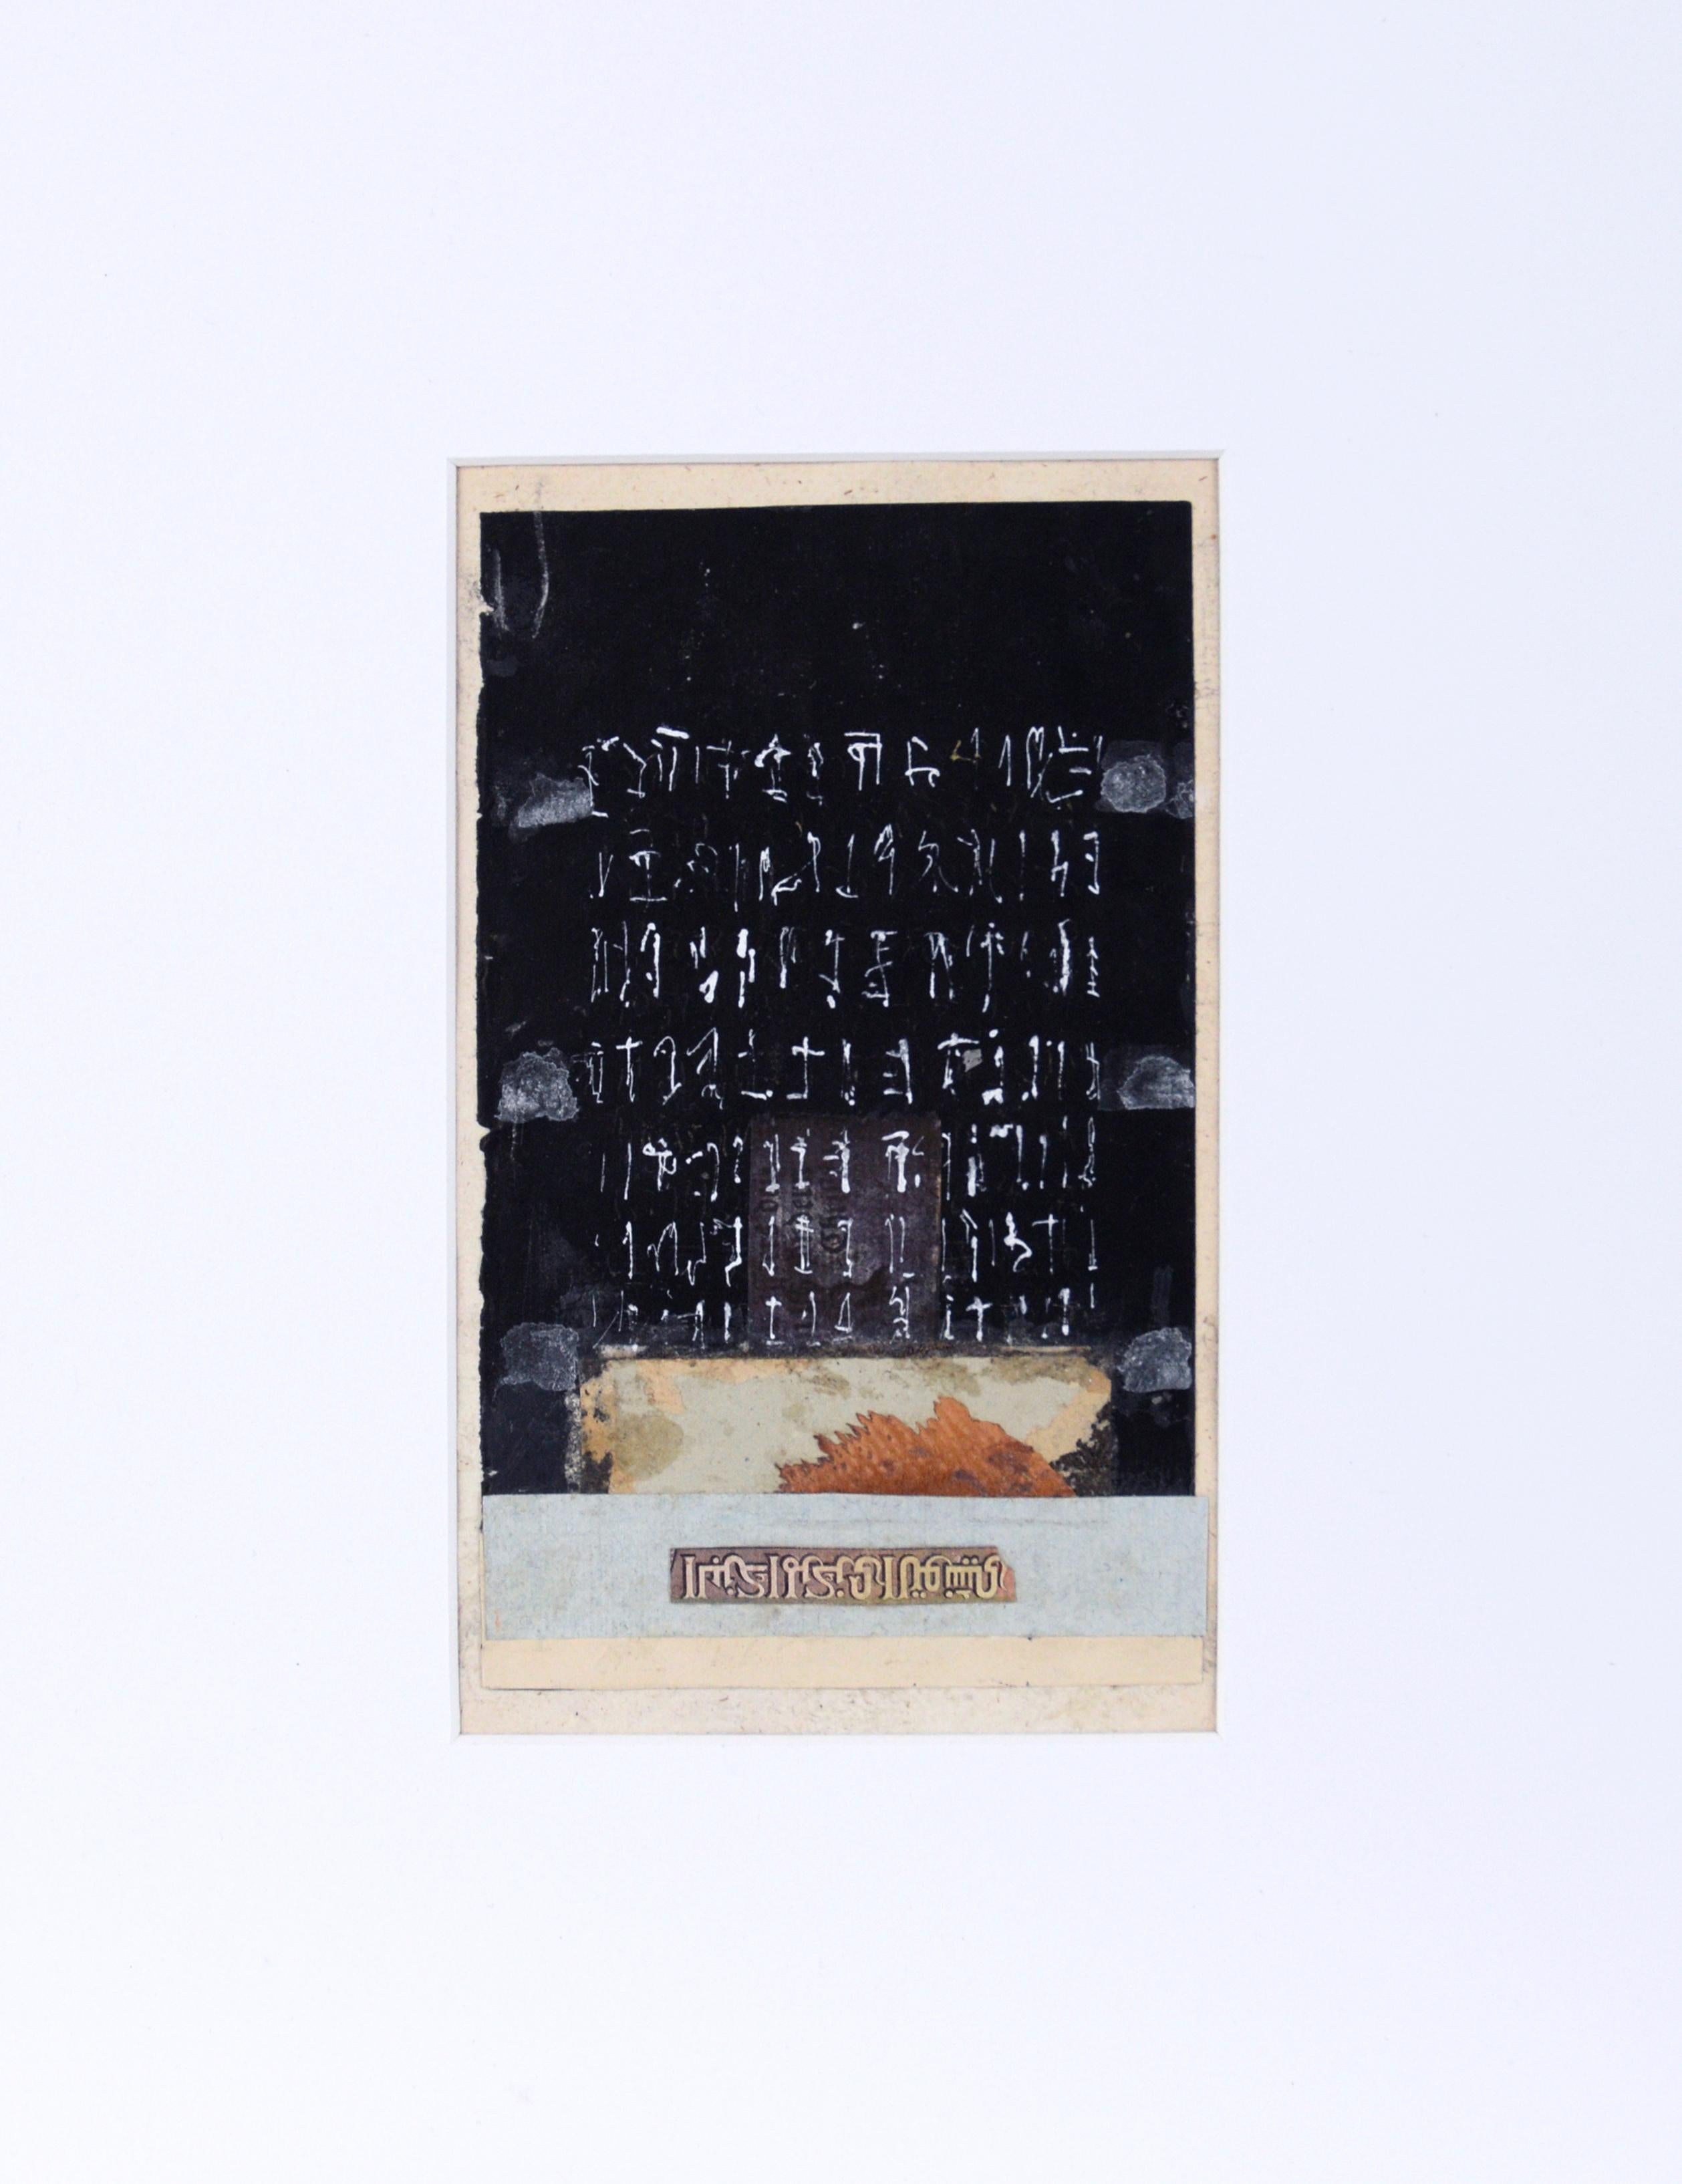 Small abstract paper collage in chalkboard black by Bay Area artist Michael Pauker (American, b. 1957). This piece is created from a few pieces of antique paper, assembled in an aesthetically pleasing ratio, with a stark contrast between codex marks